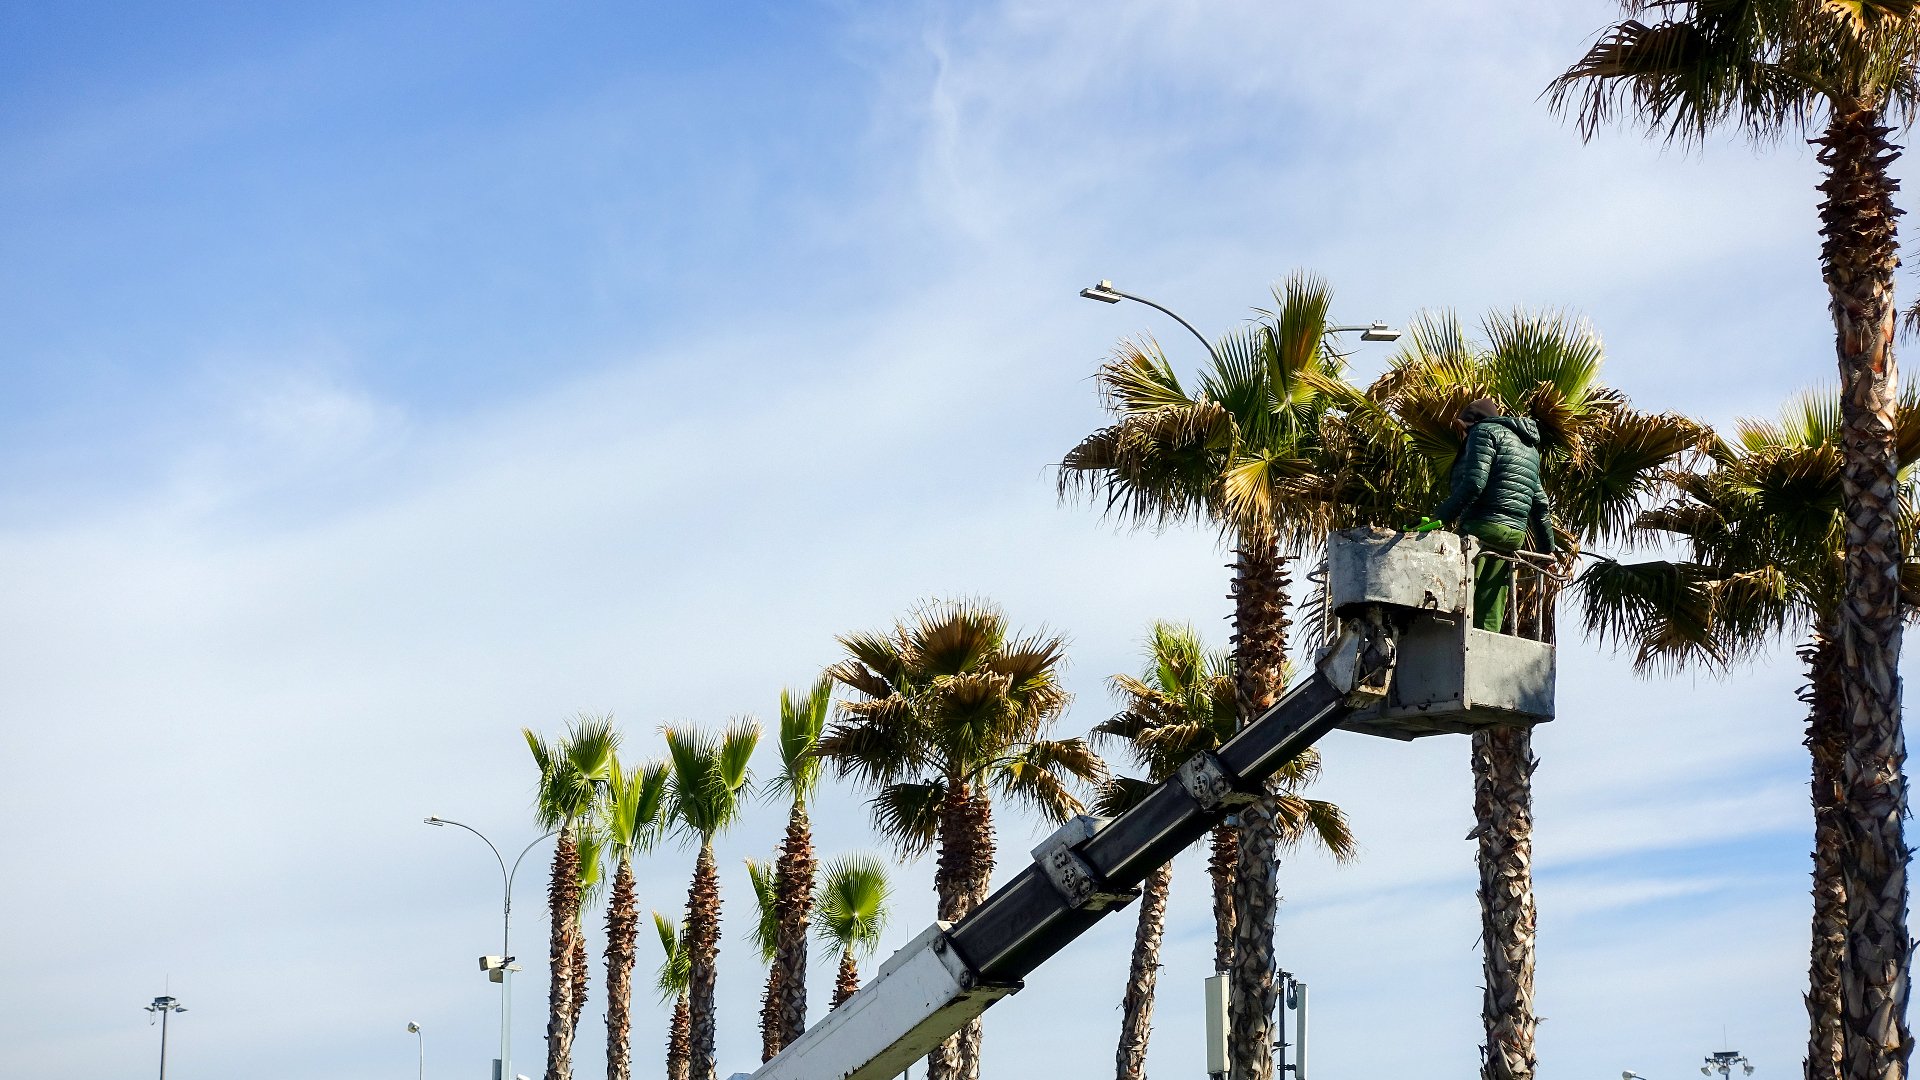 Don’t Try to Trim Your Palm Trees Yourself! Hire Pros to Do It Instead